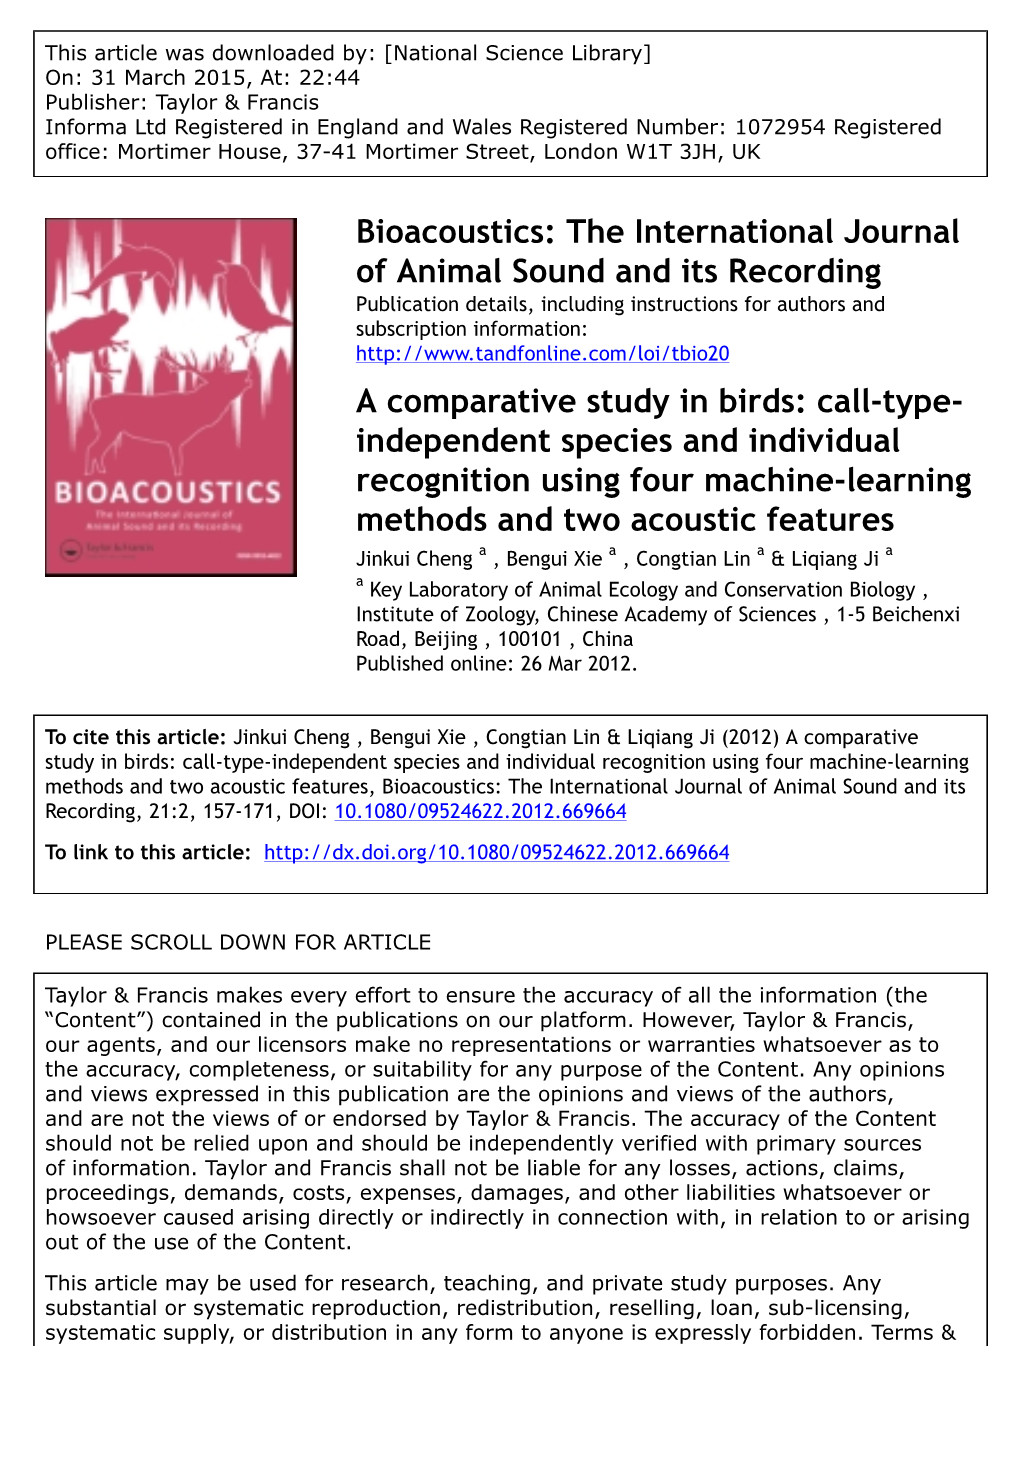 Bioacoustics: the International Journal of Animal Sound and Its